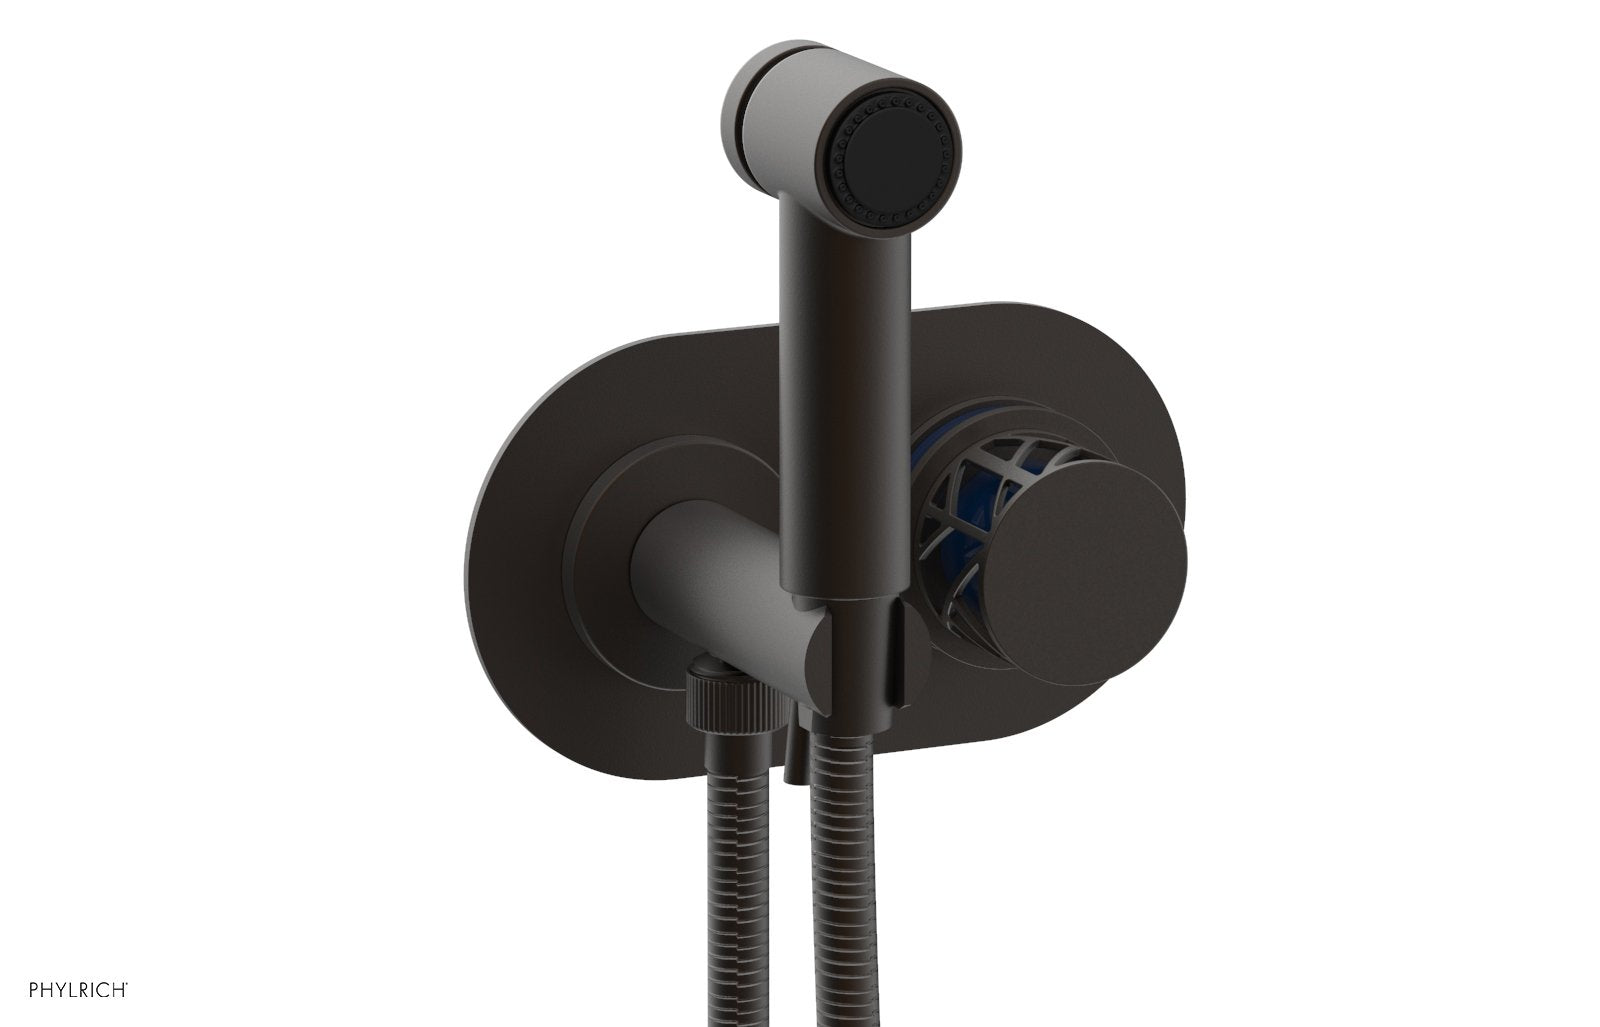 Phylrich JOLIE Wall Mounted Bidet, Round Handle with "Navy Blue" Accents